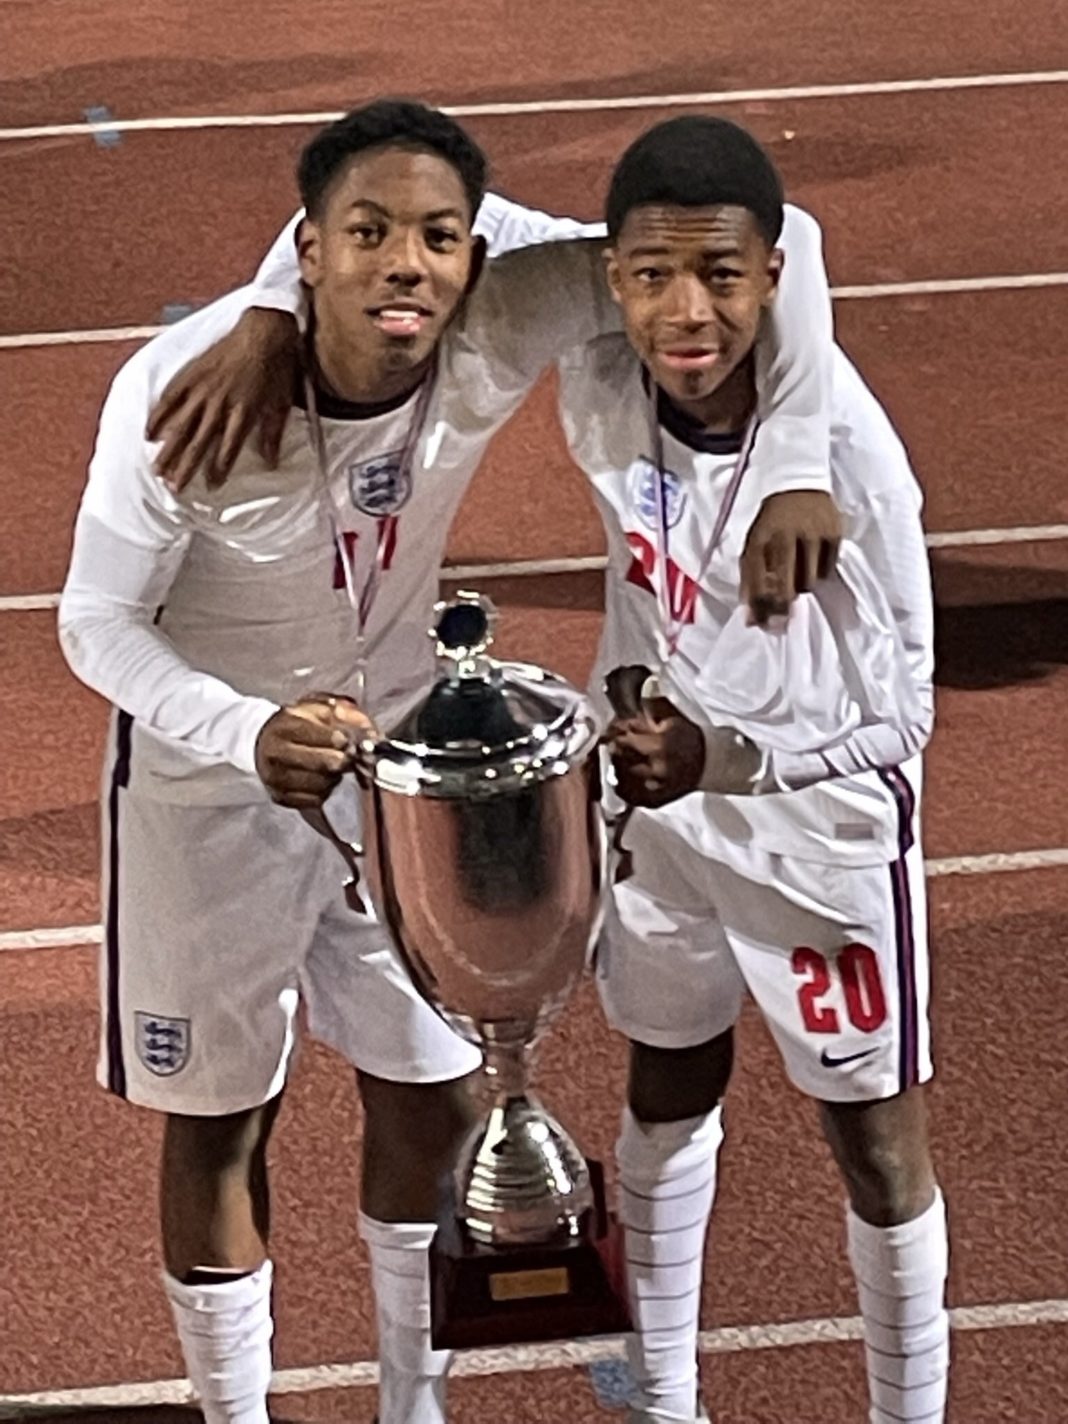 Myles Lewis-Skelly (L) with the Val de Marne Tournament trophy